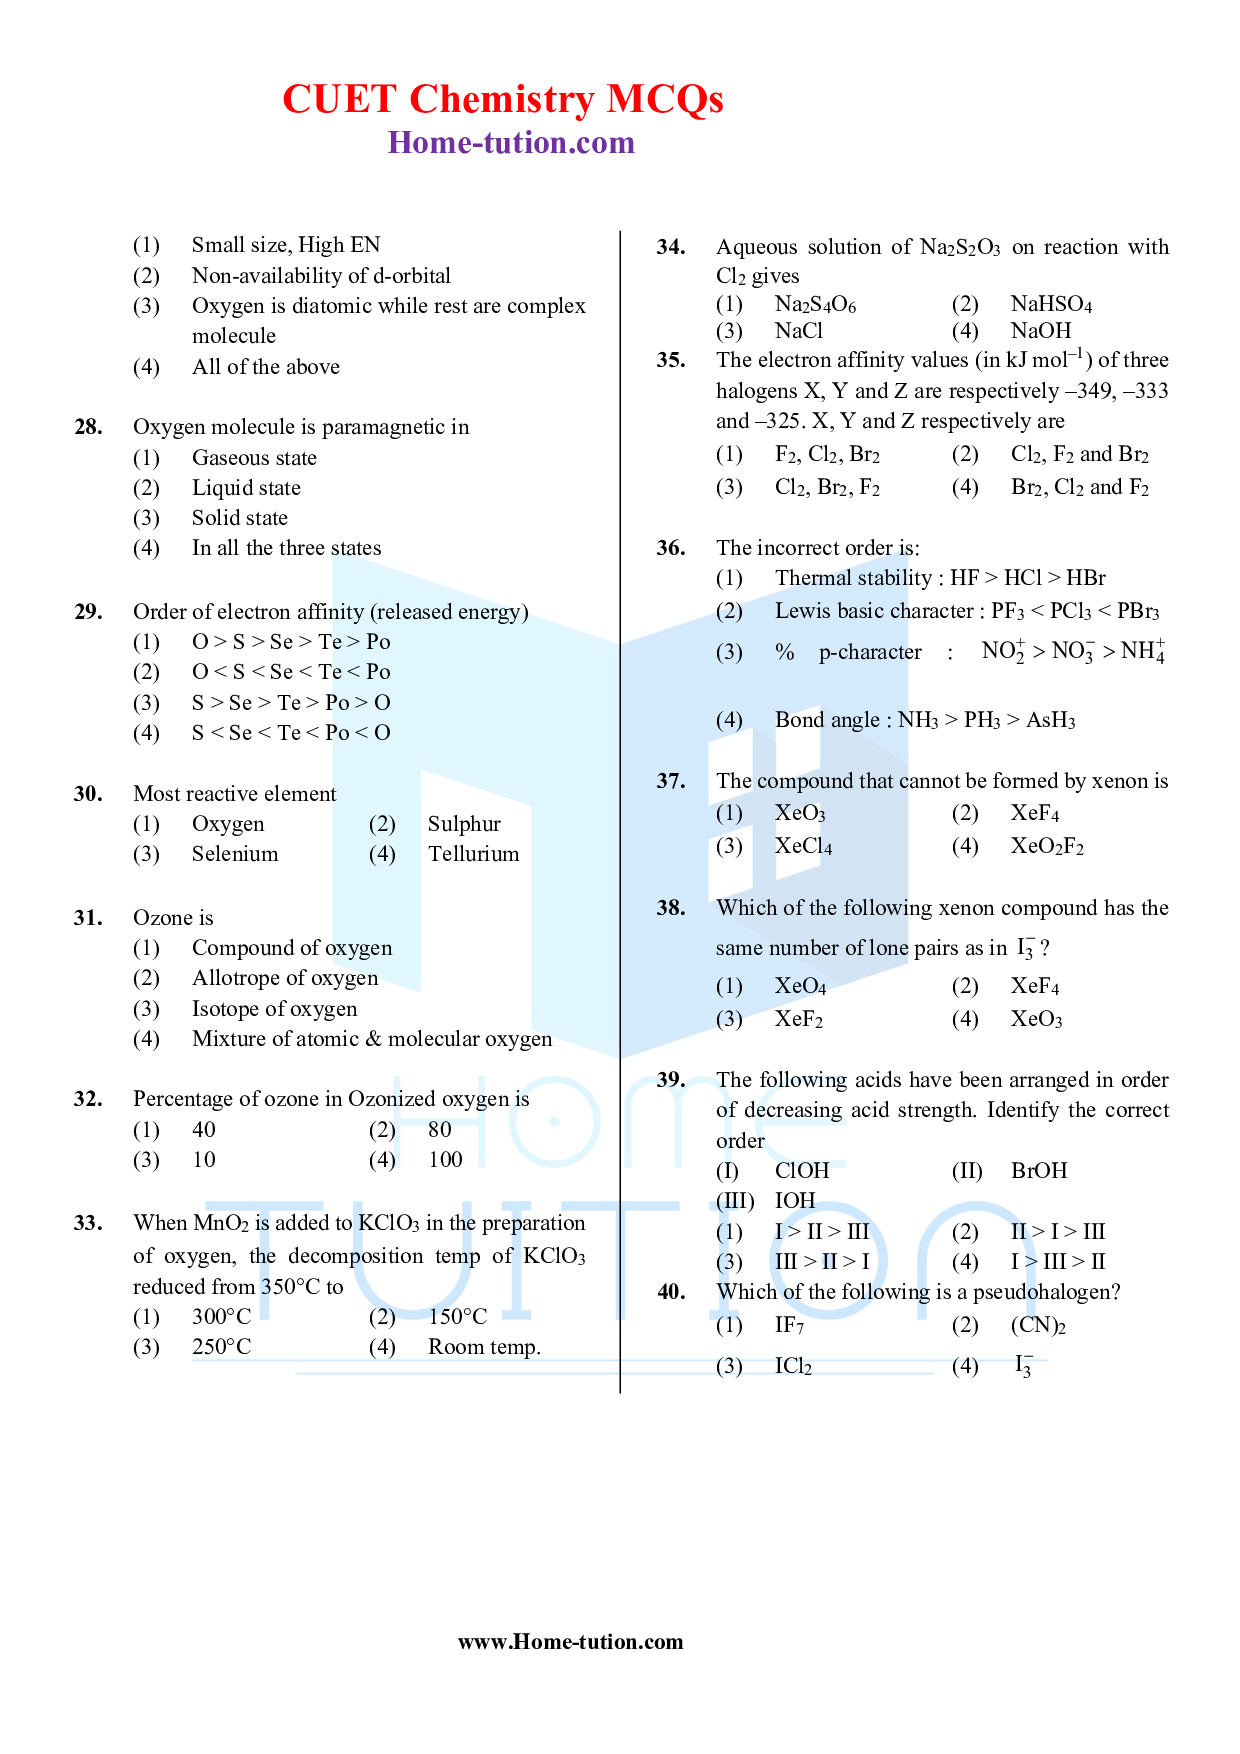 CUET MCQ Questions For Chapter-07 P Block Elements